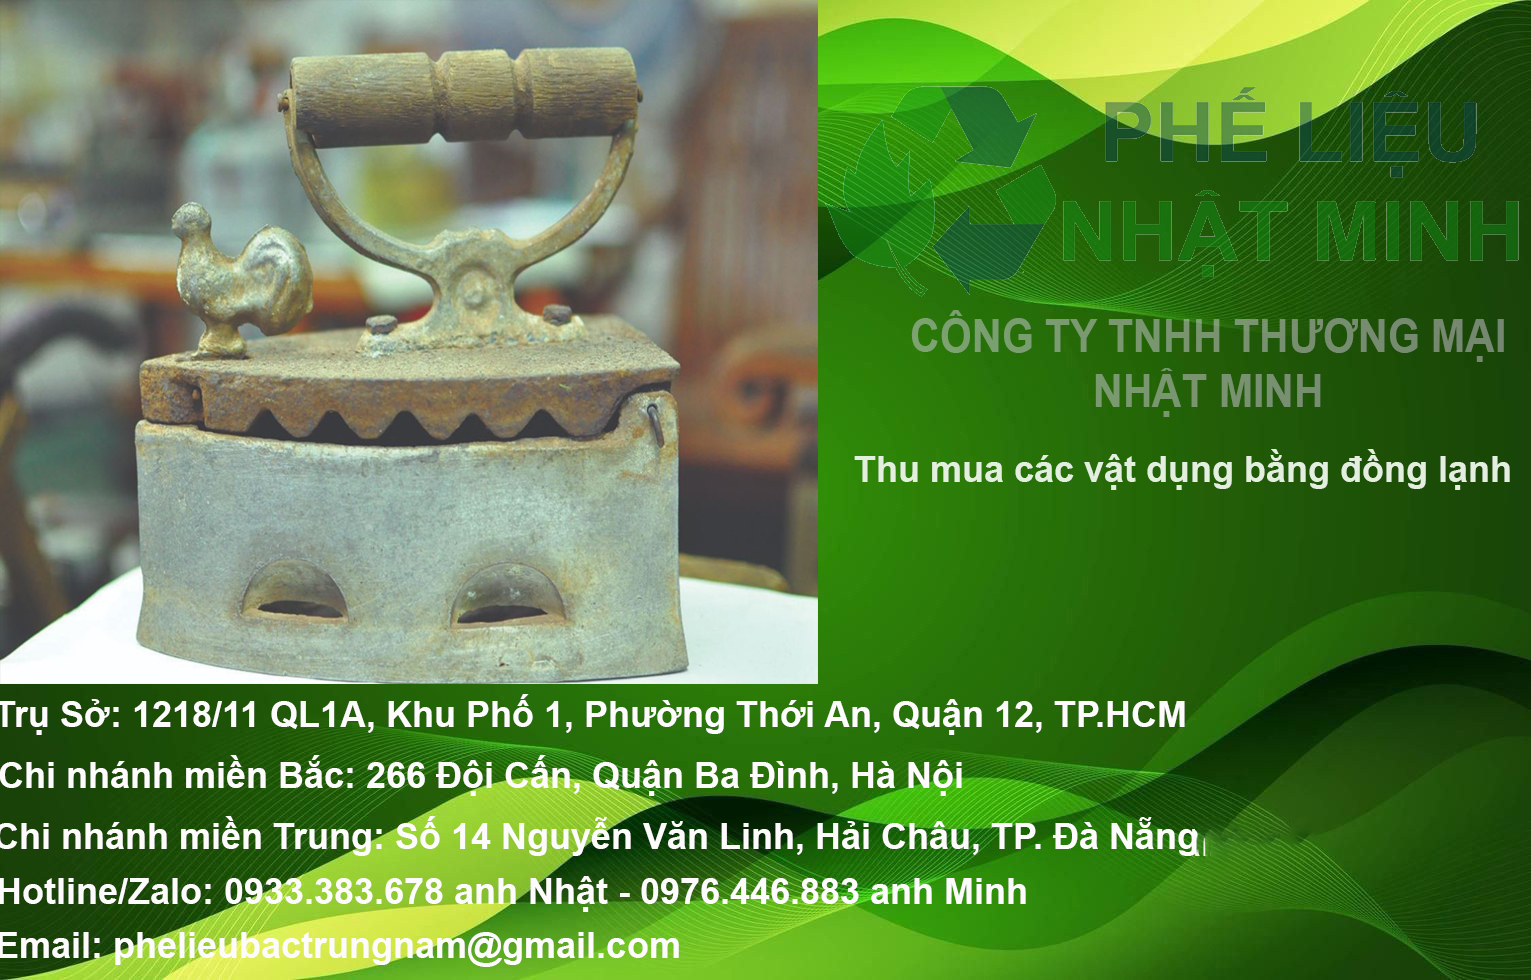 DONG LANH GIA CAO CONG TY NHAT MINH